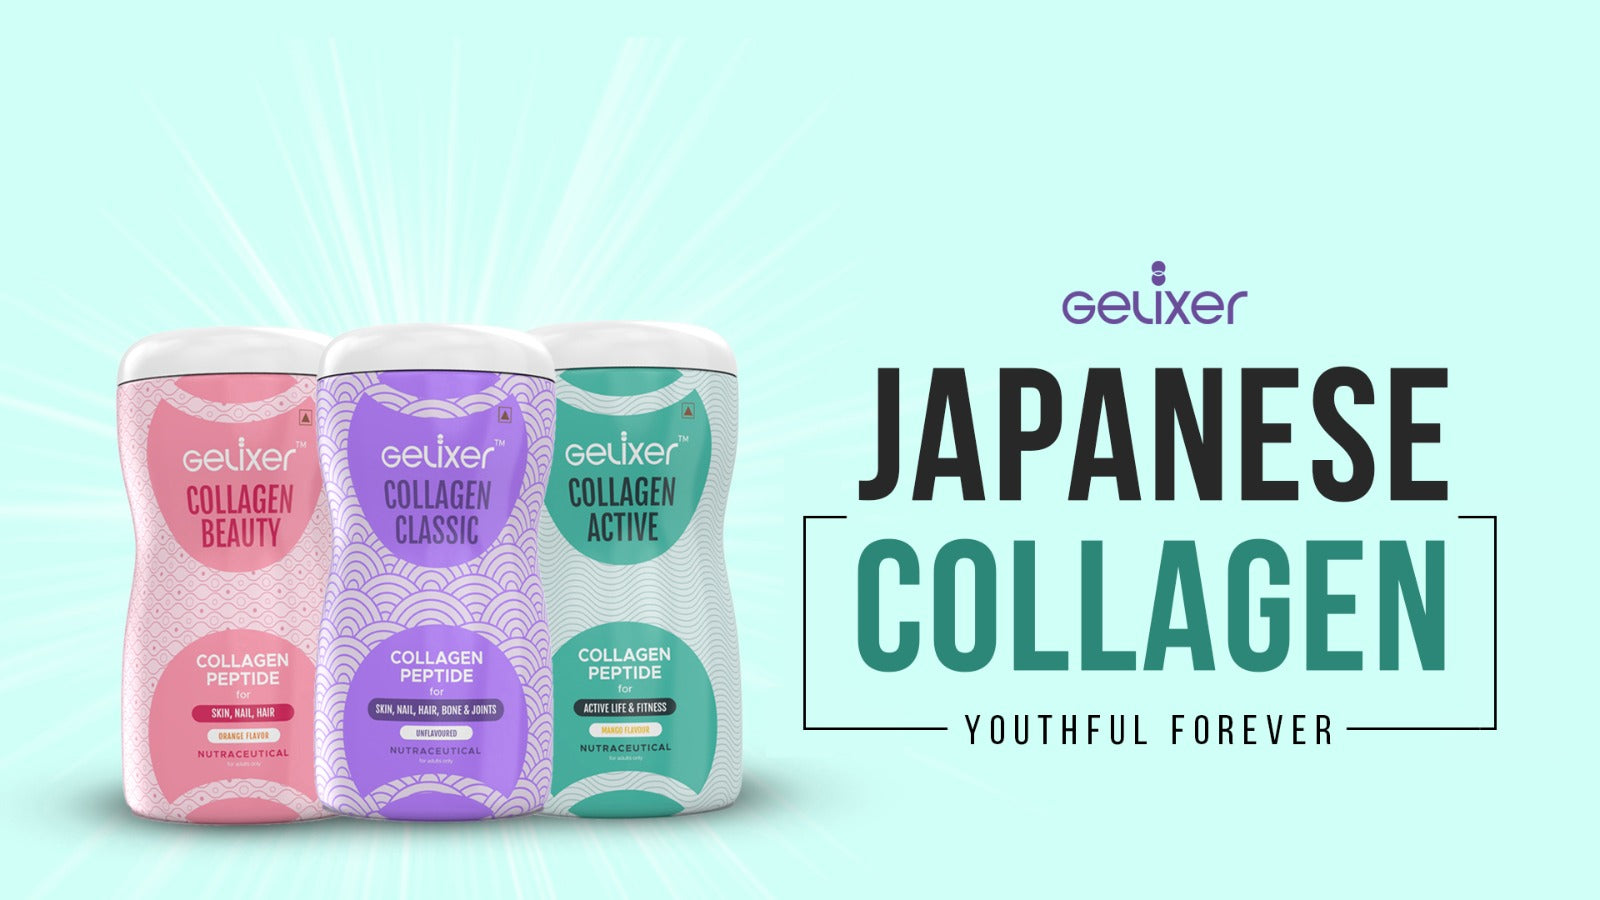 Gelixer_Japanese_Collagen_Youthful_Forever